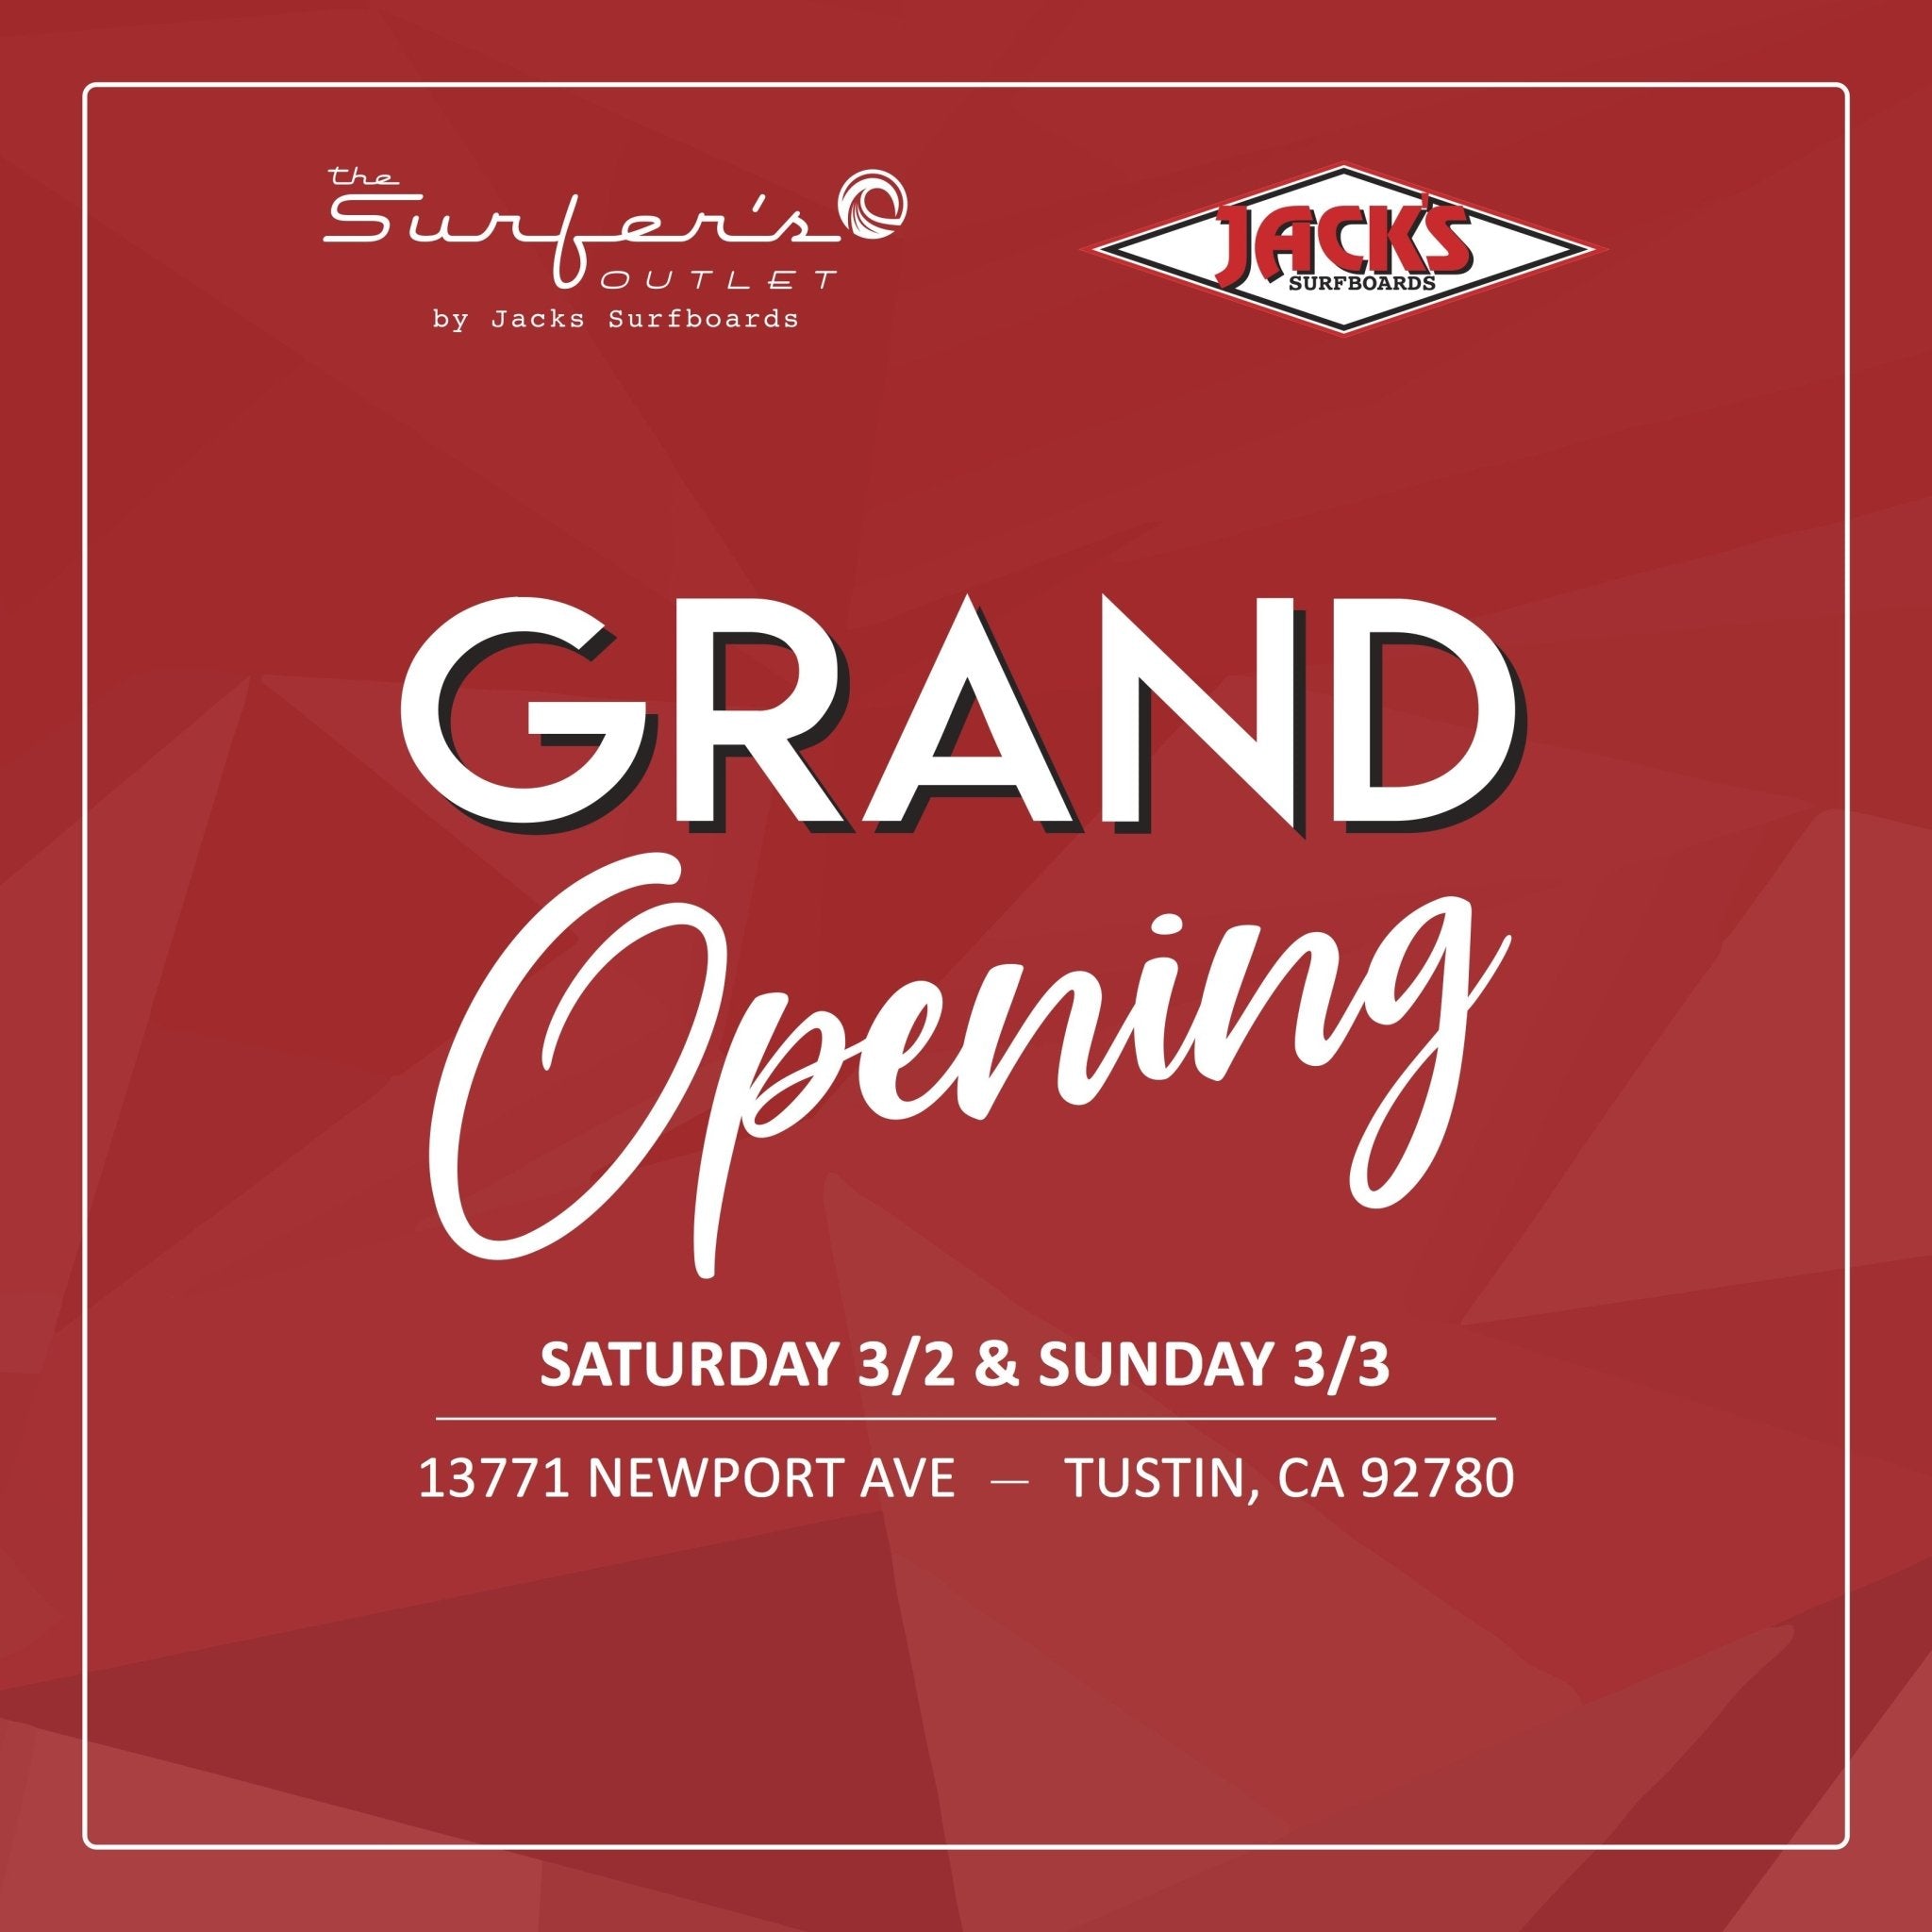 Grand Opening  - Surfer's Outlet | Tustin | Jack's Surfboards